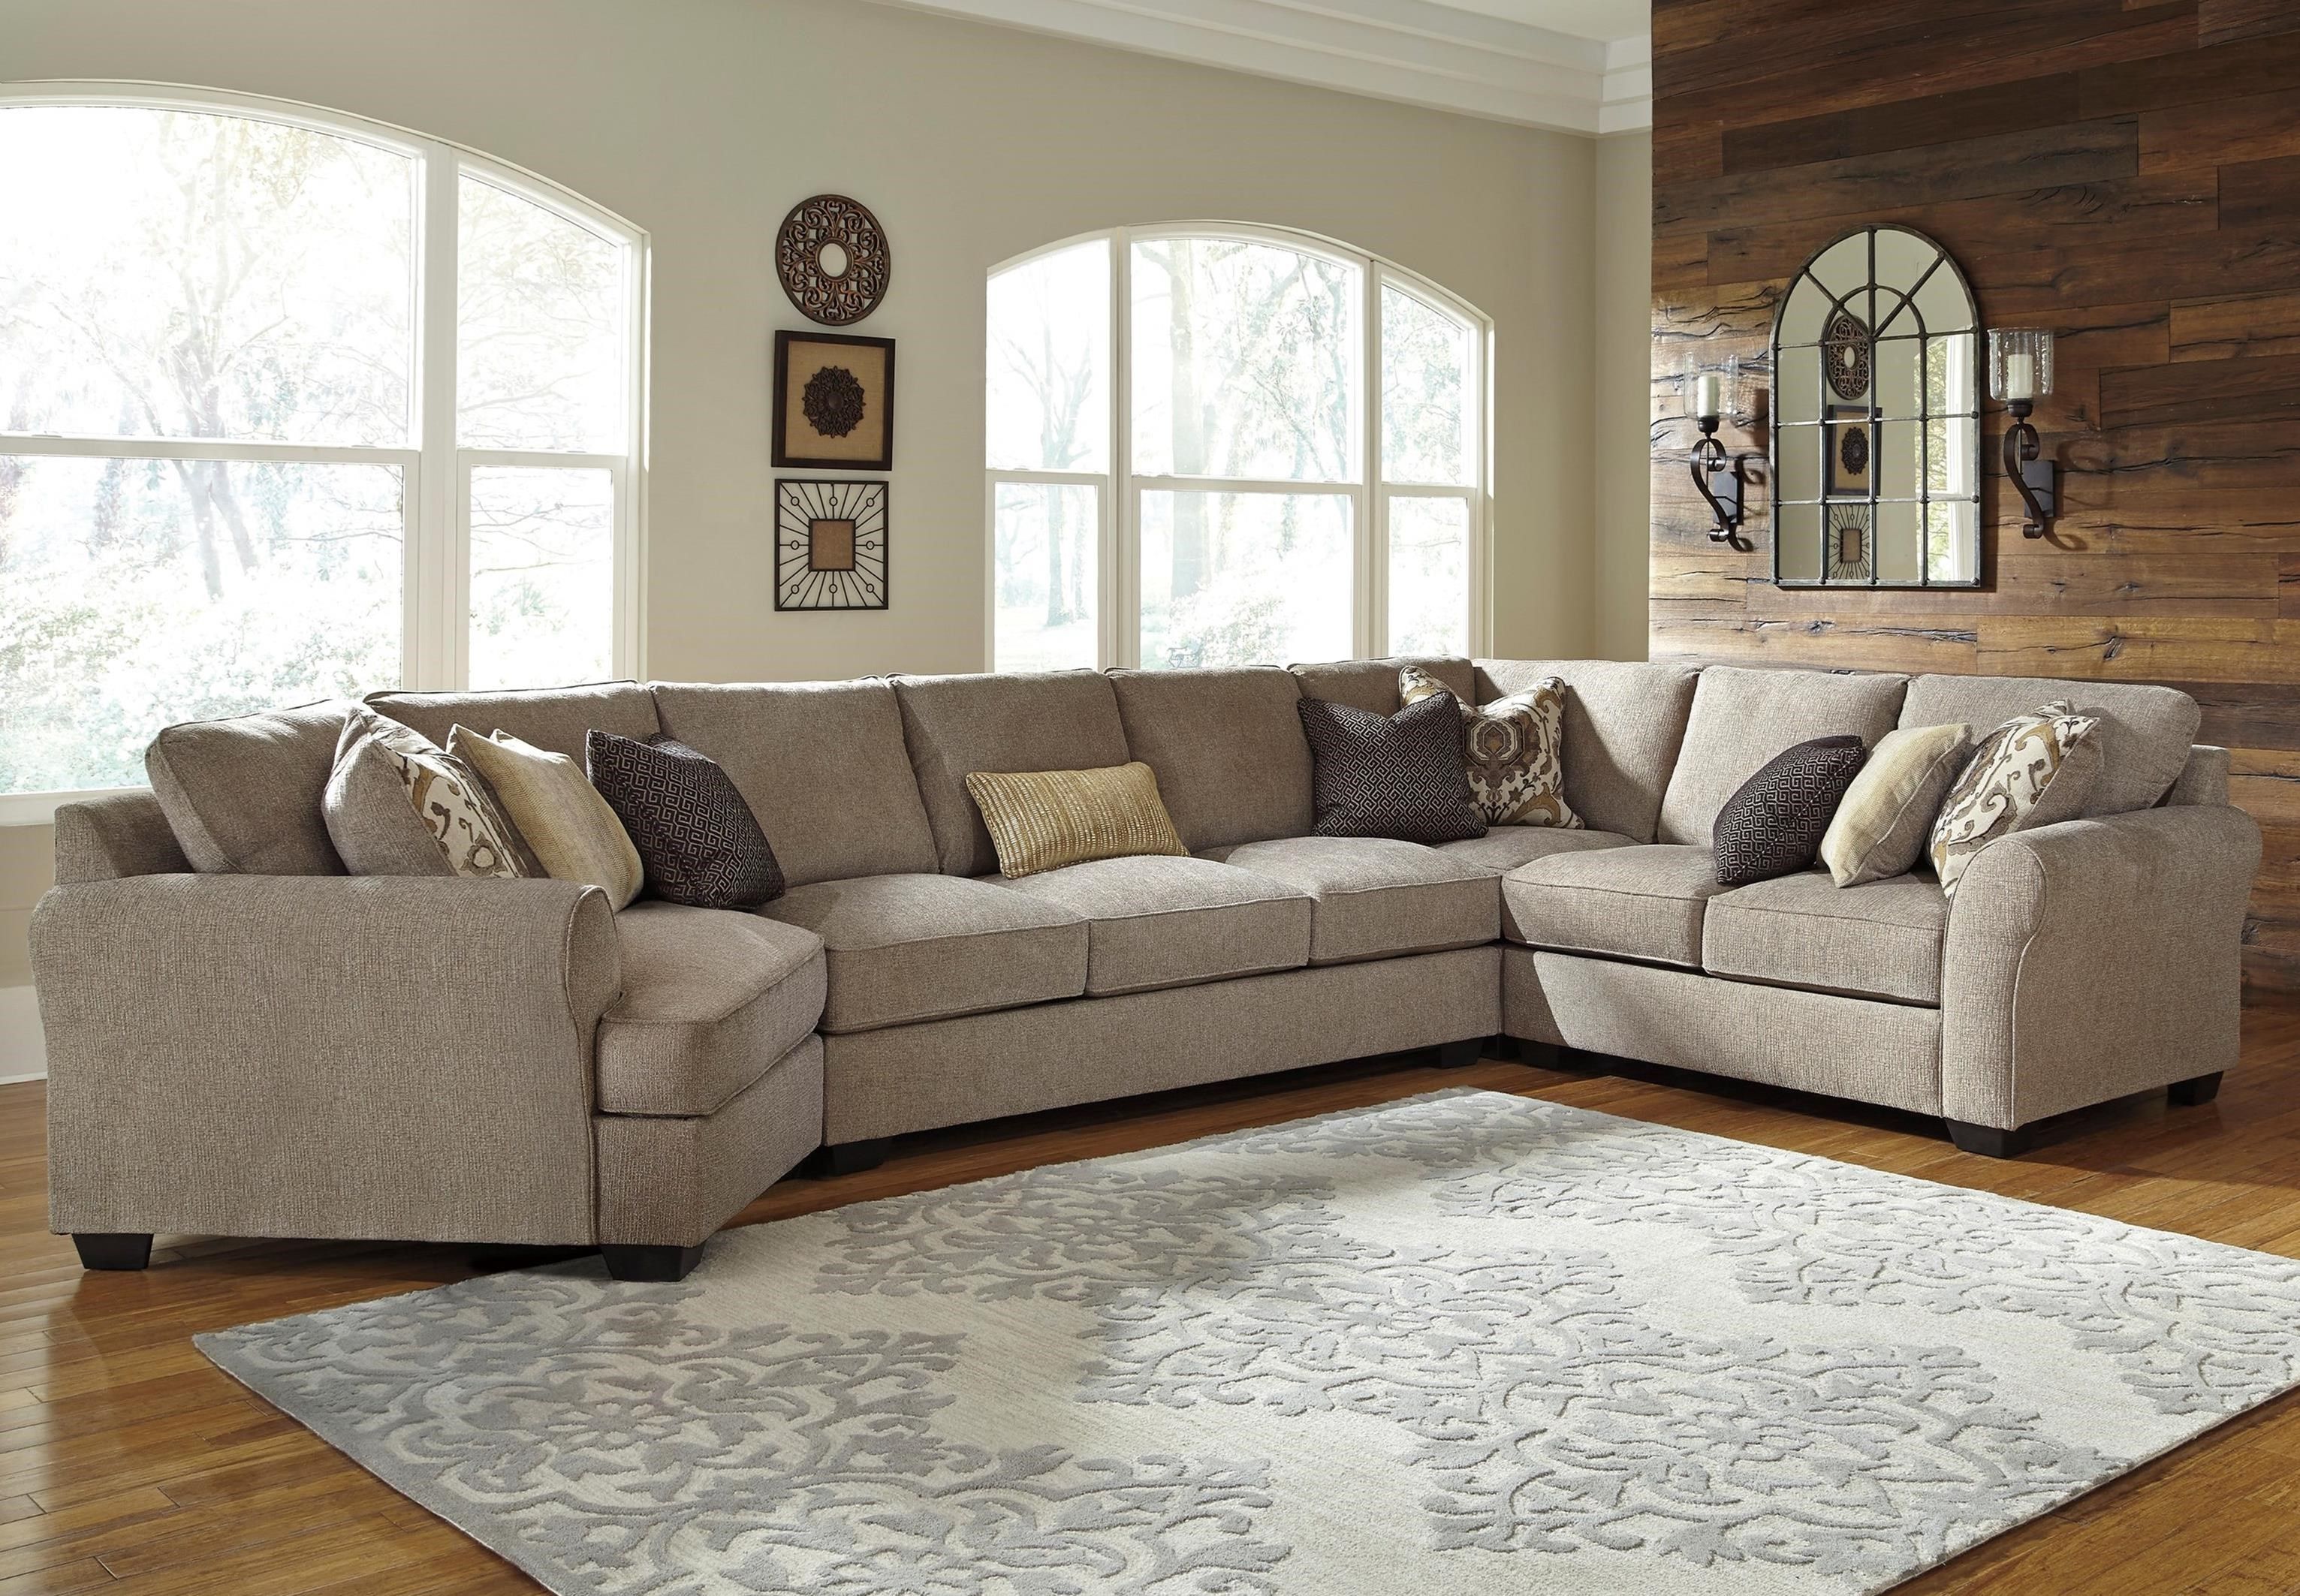 Benchcraft Pantomine 4 Piece Sectional With Left Cuddler Armless Inside Cuddler Sectional Sofa 